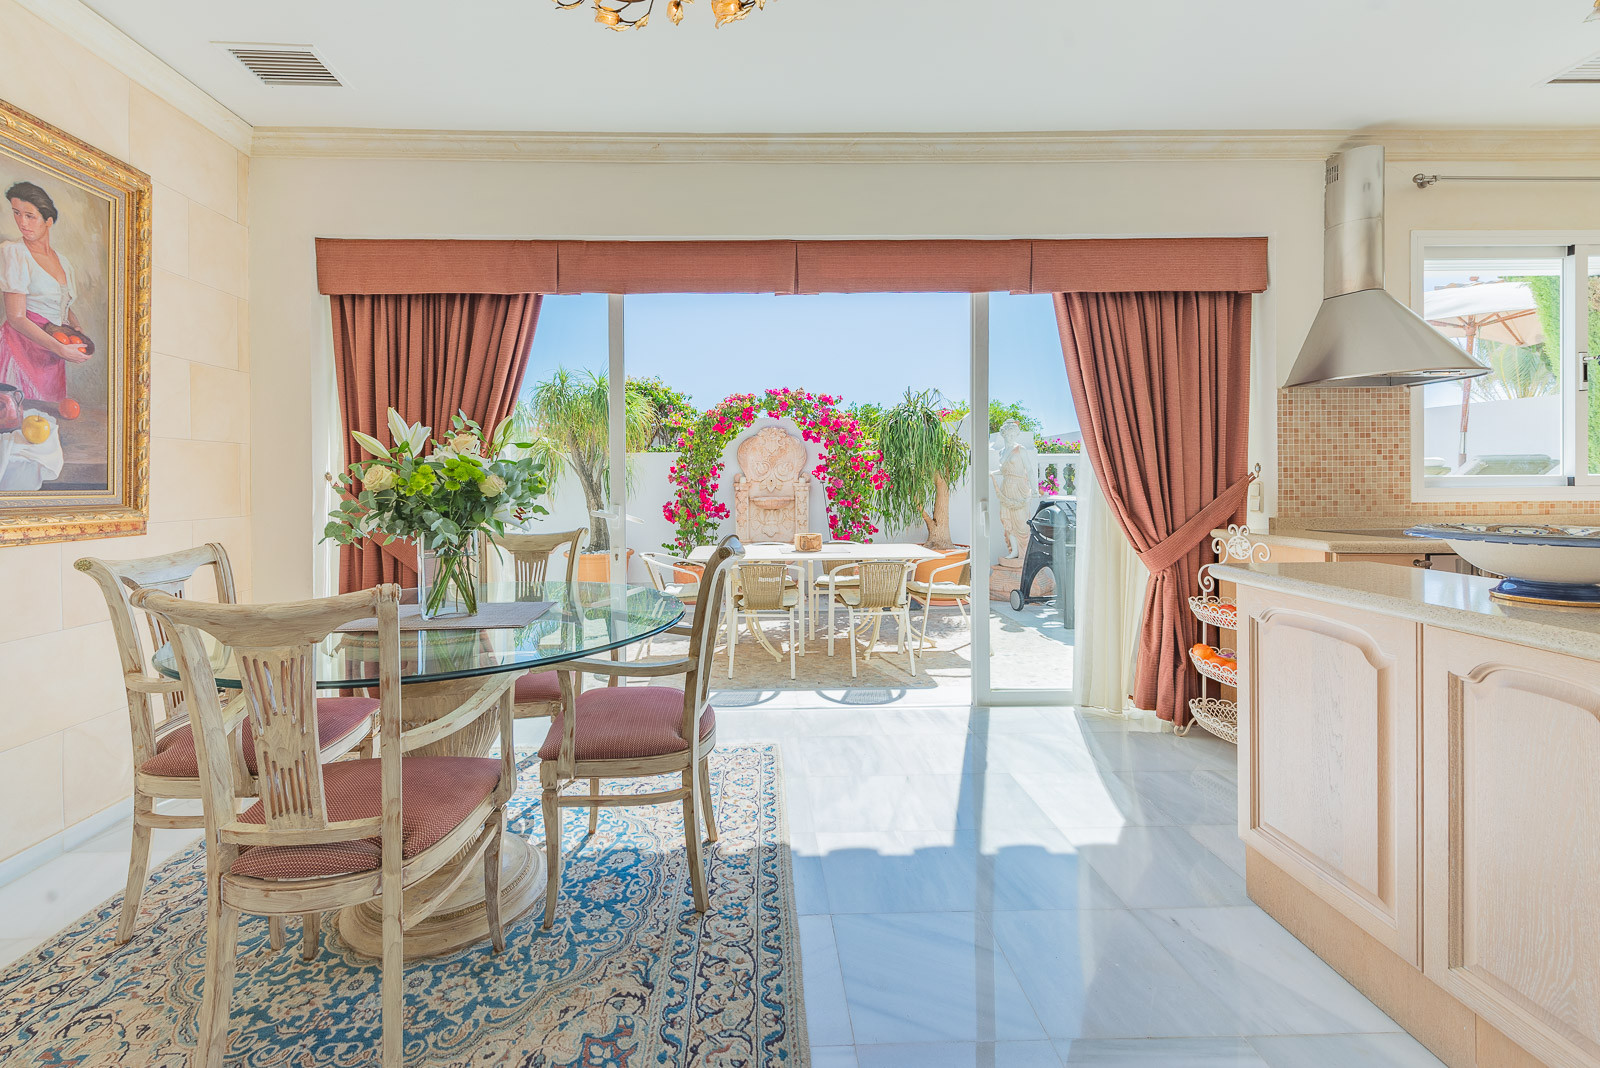  FRONTLINE BEACH TOWNHOUSE WITH AMAZING SEA VIEWS IN OASIS CLUB, MARBELLA